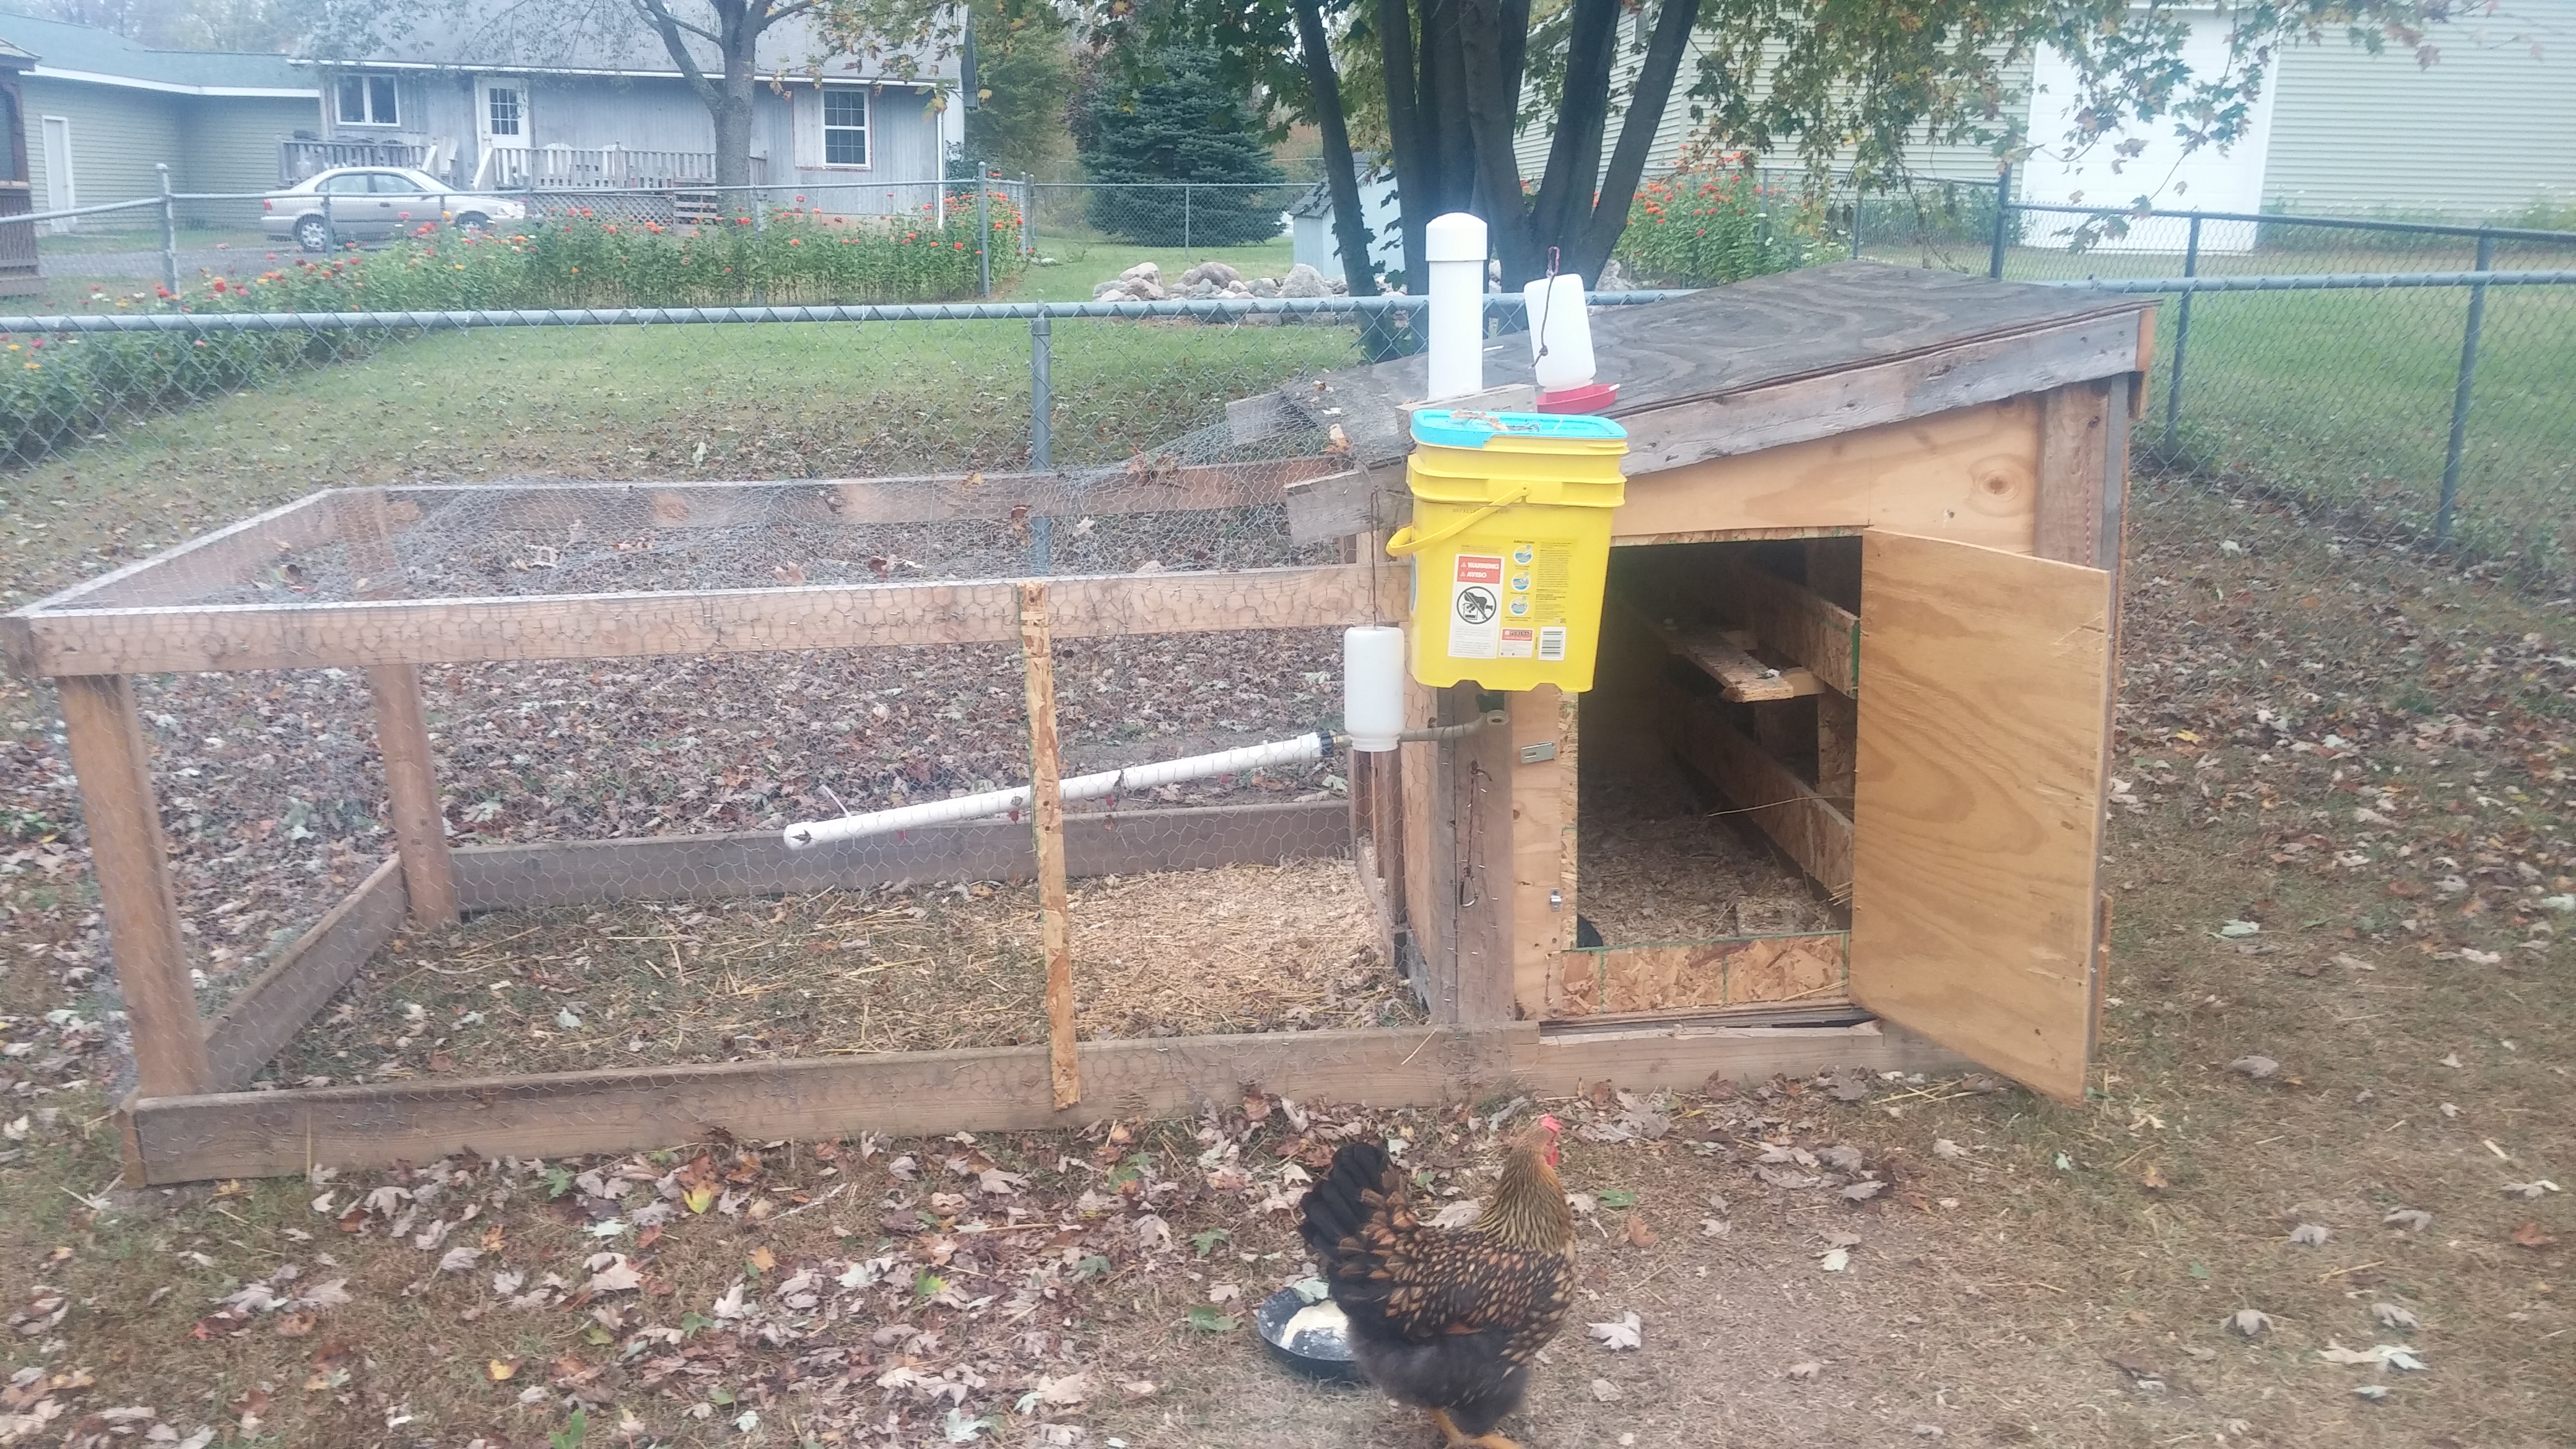 4 inch pipe threw the roof for feed, has 2 elbows to hold food. A five gallon bucket with hose to a pvc pipe with water nipples. Also has a forest to fill gaming w a get dish for in the coop.